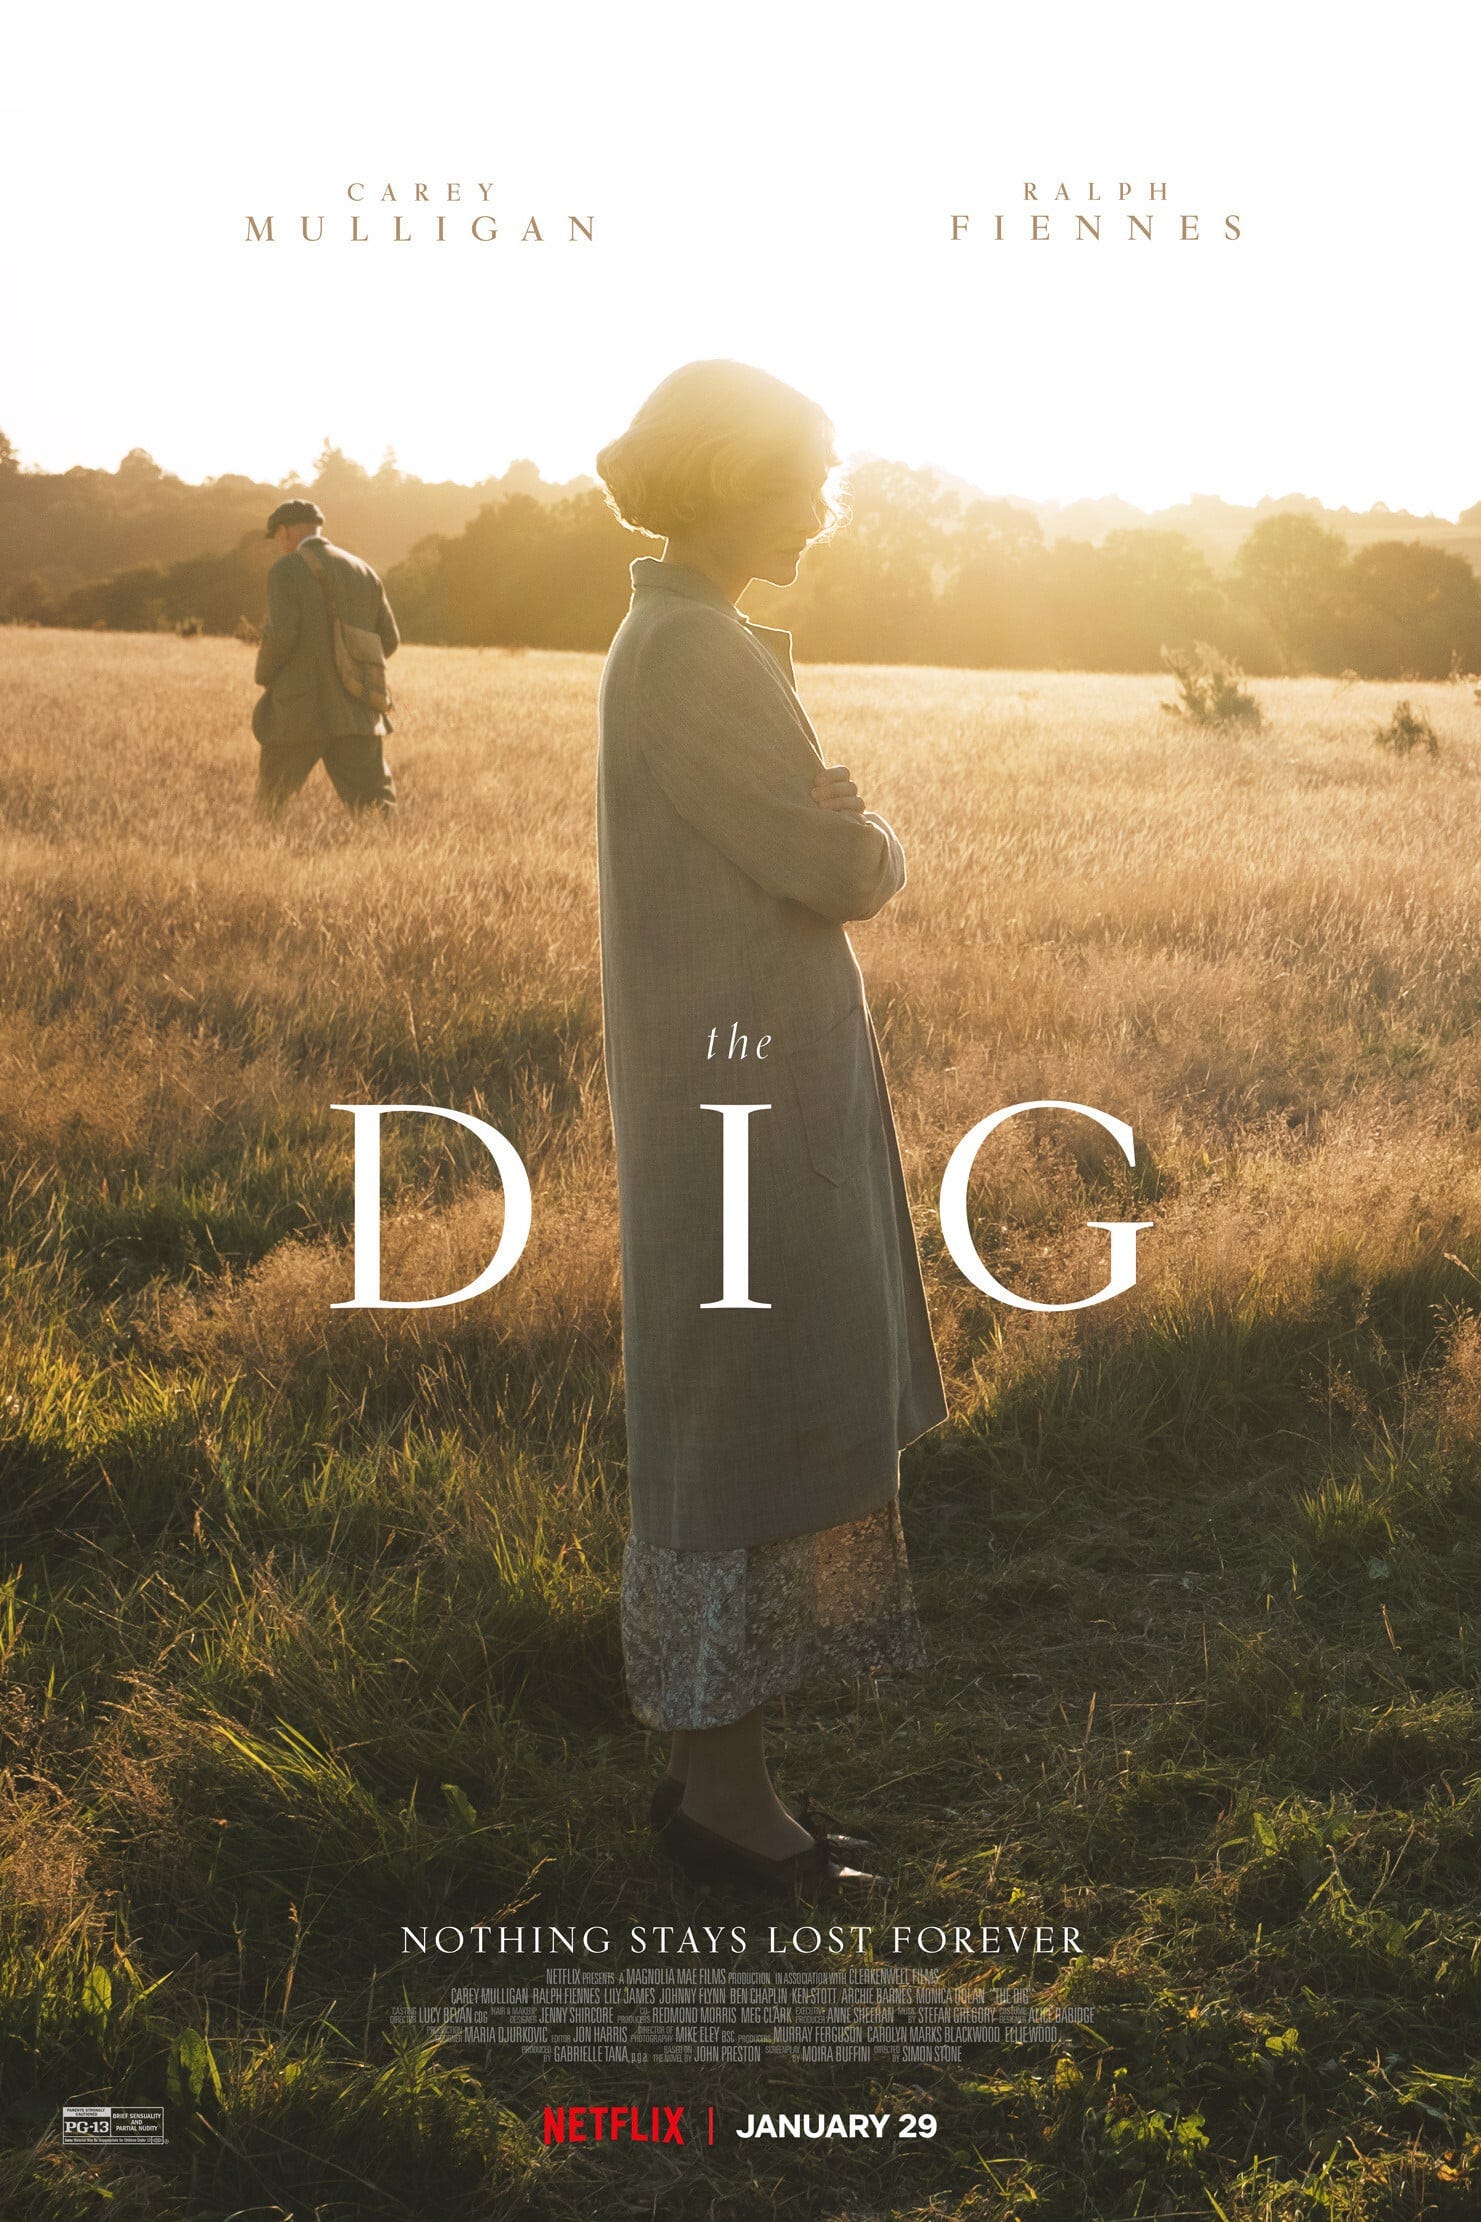 Watch Free The Dig 2021 Full Hd Online By Alice H Johnson Watch The Dig 2021 Full Video Jan 2021 Medium